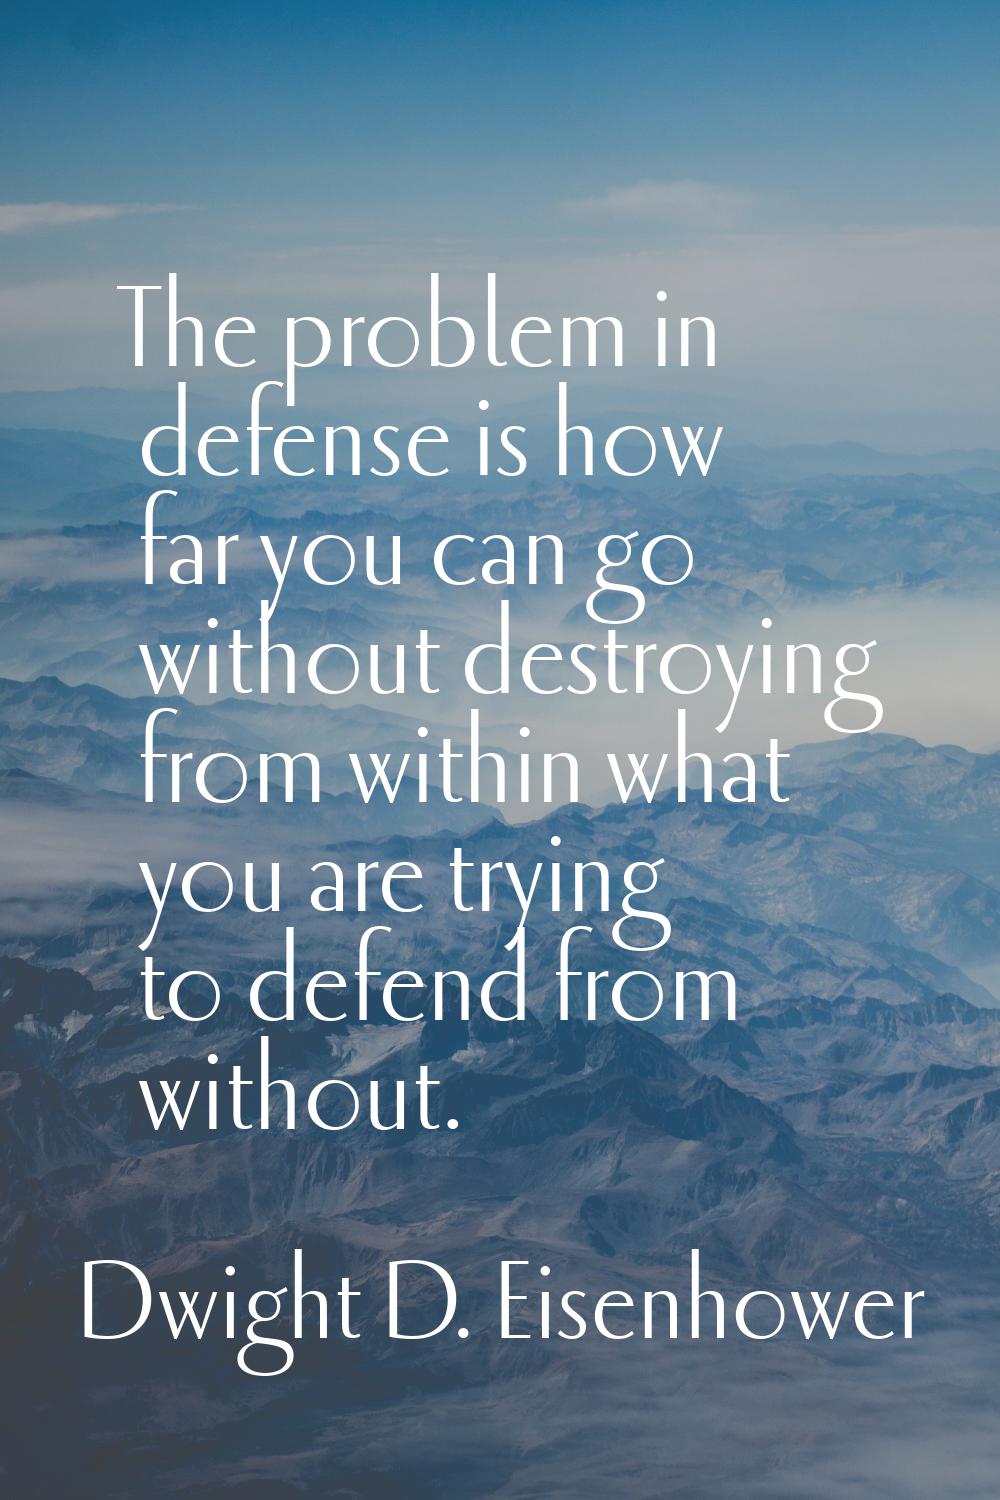 The problem in defense is how far you can go without destroying from within what you are trying to 